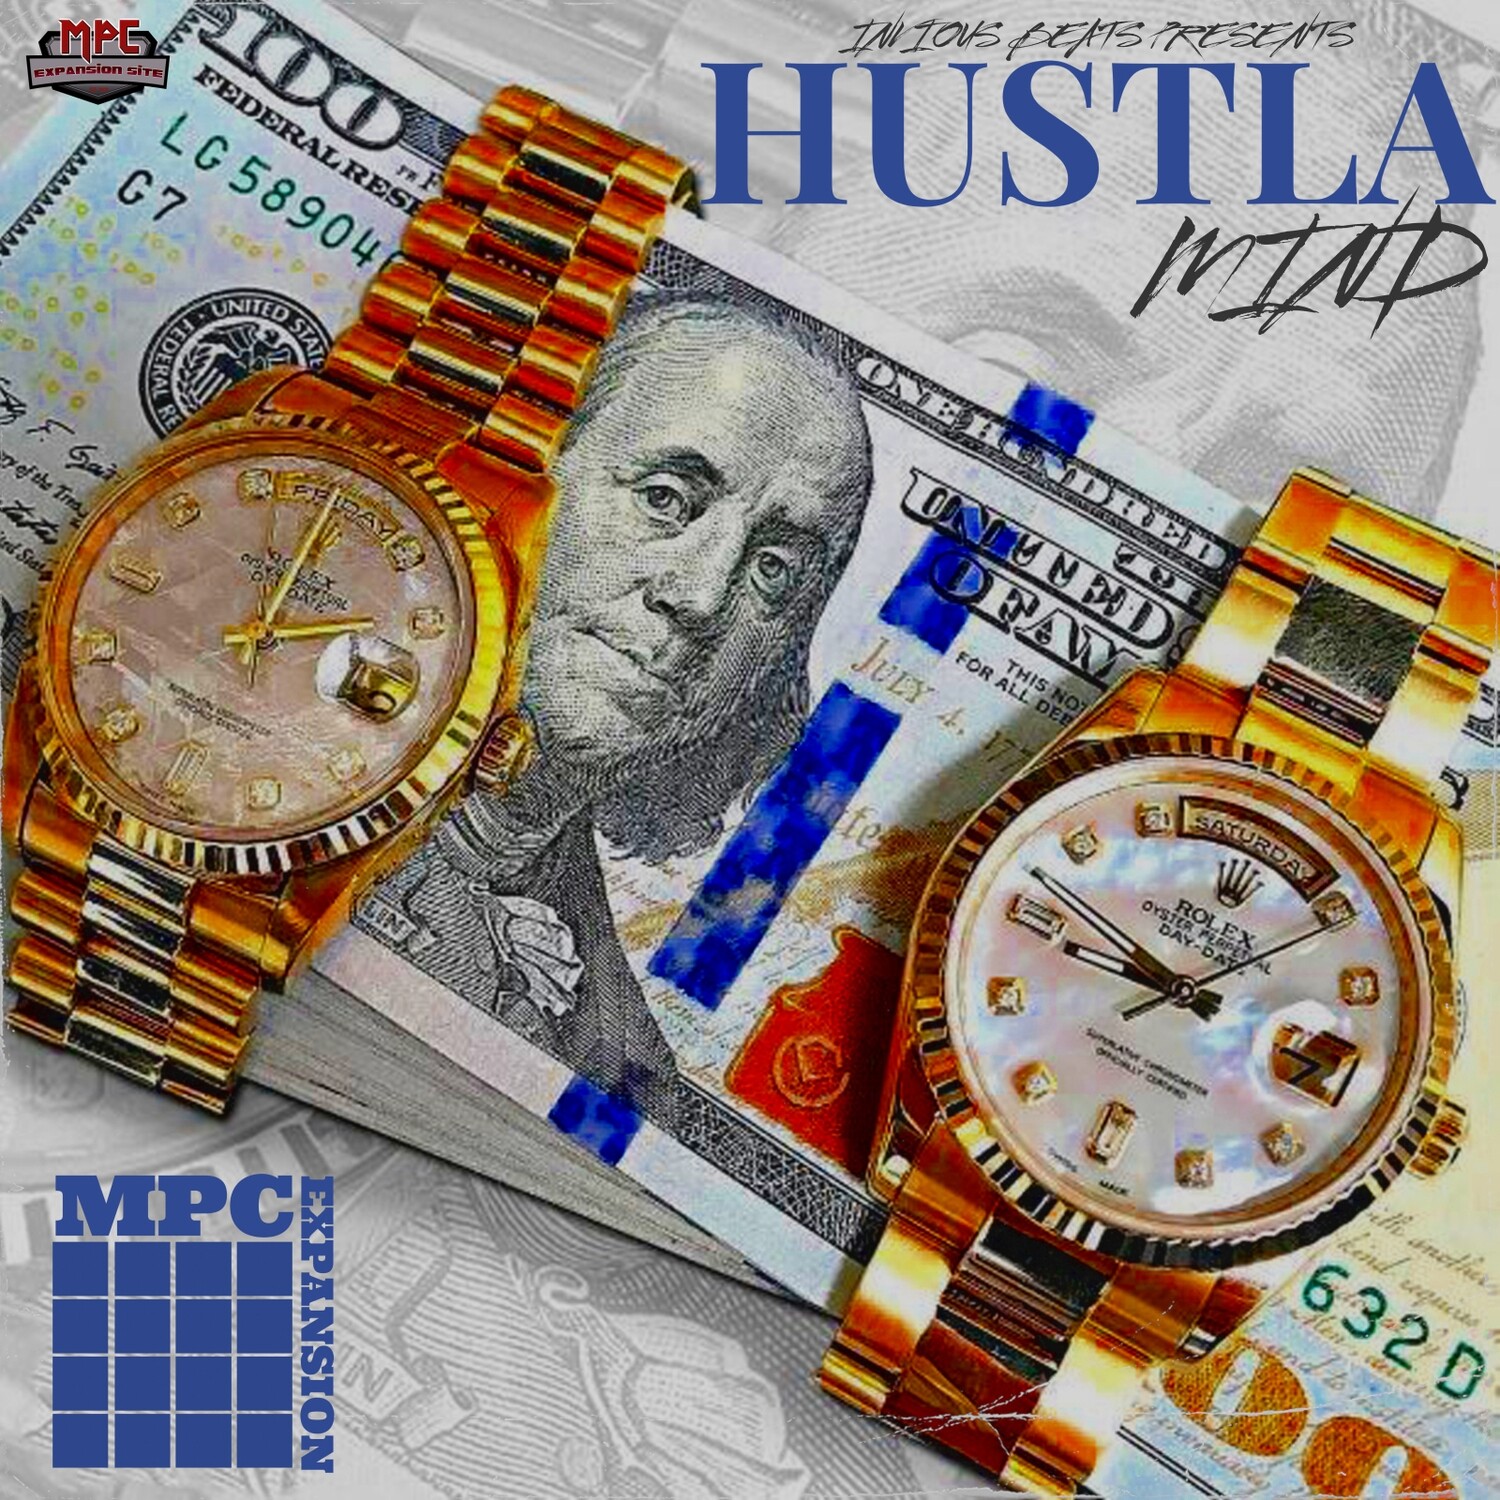 MPC EXPANSION 'HUSTLA MIND' by INVIOUS